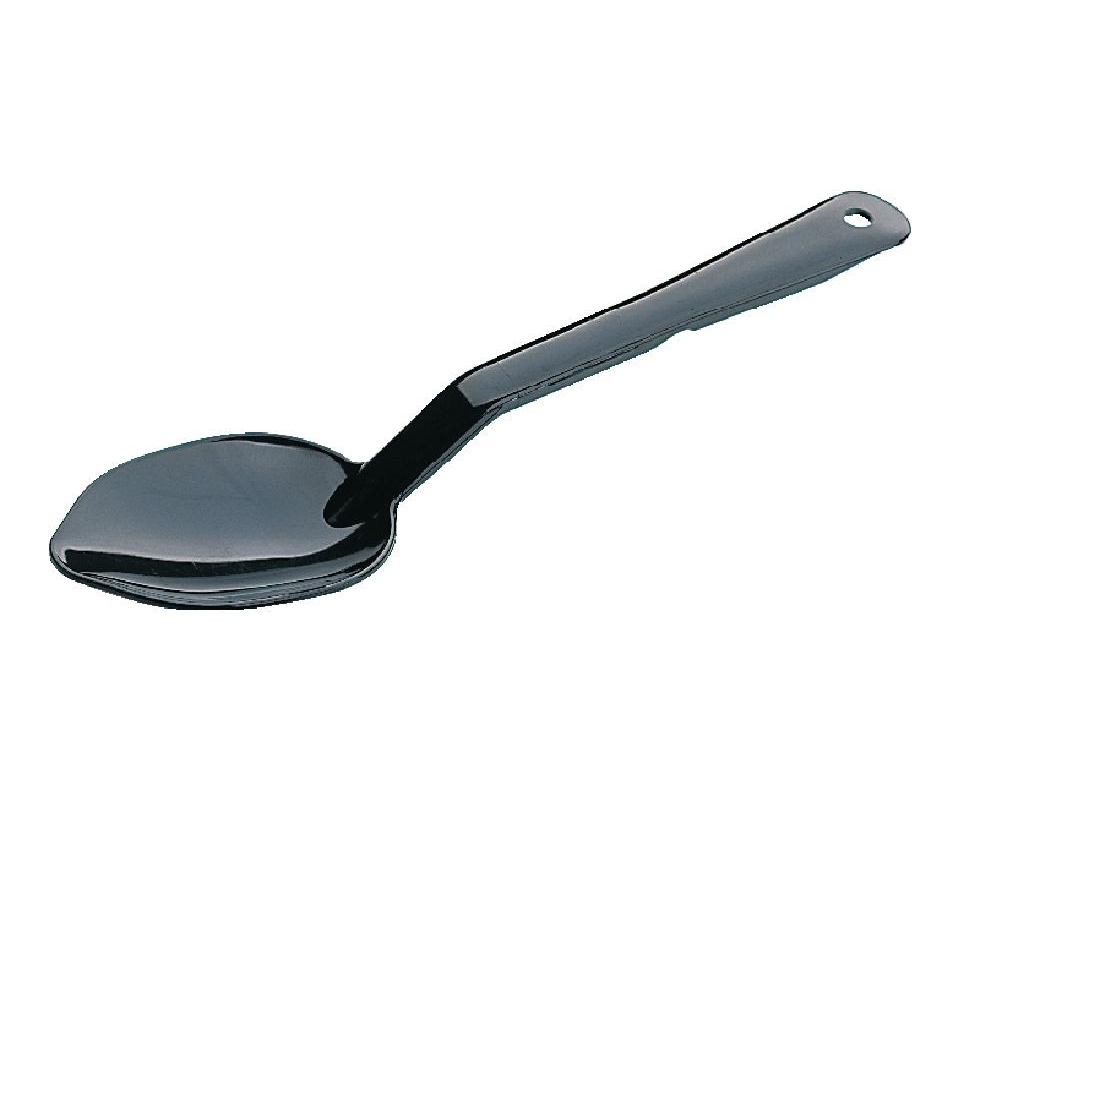 Catering Line Silicone Slotted Spoon: Large Rubber Bottomed Strainer Spoon  for Cooking, Mixing, and Serving - Nonstick Heat Resistant Cooking Utensils